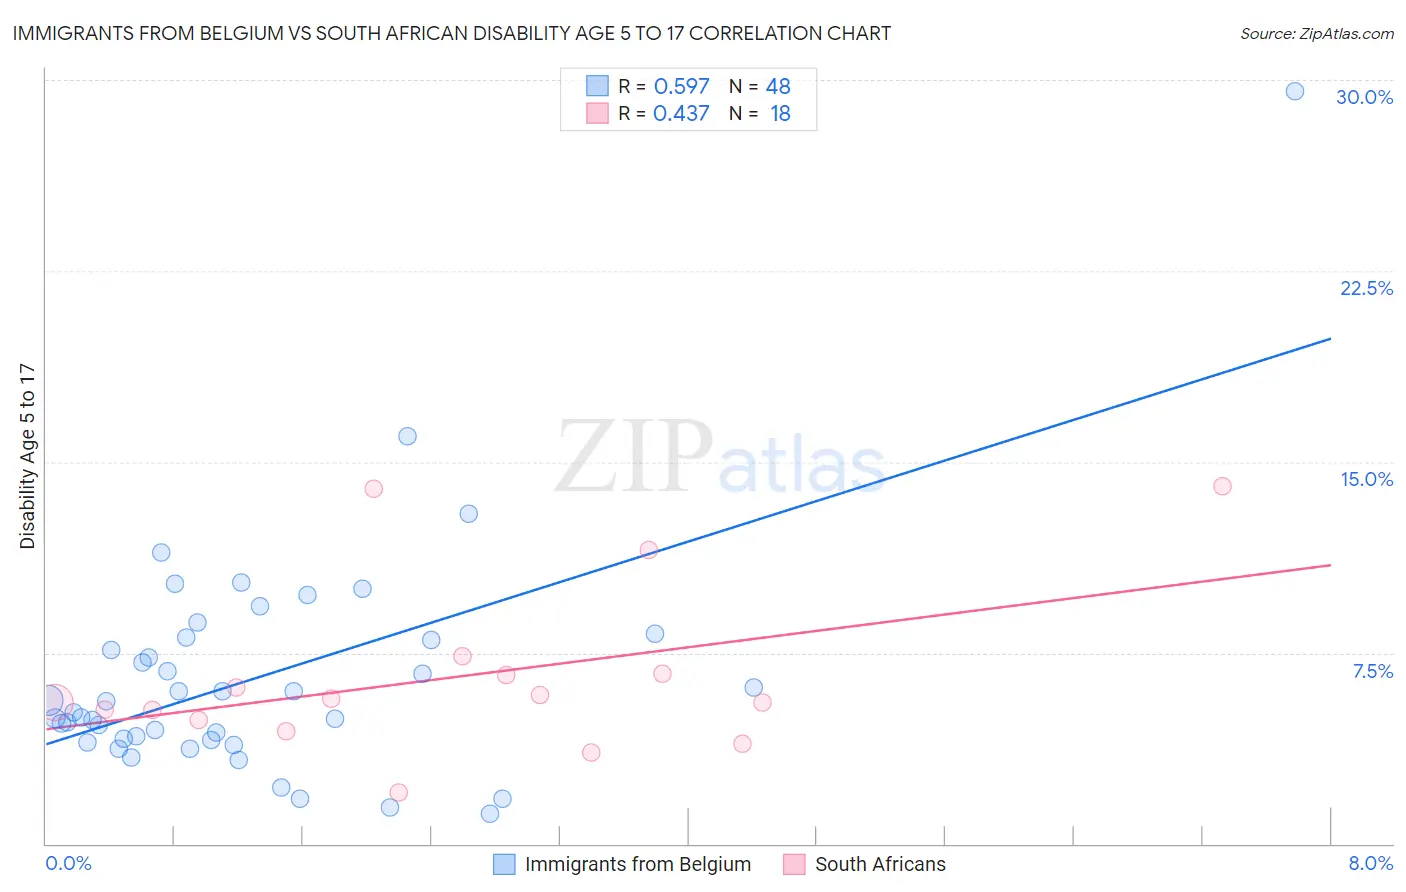 Immigrants from Belgium vs South African Disability Age 5 to 17